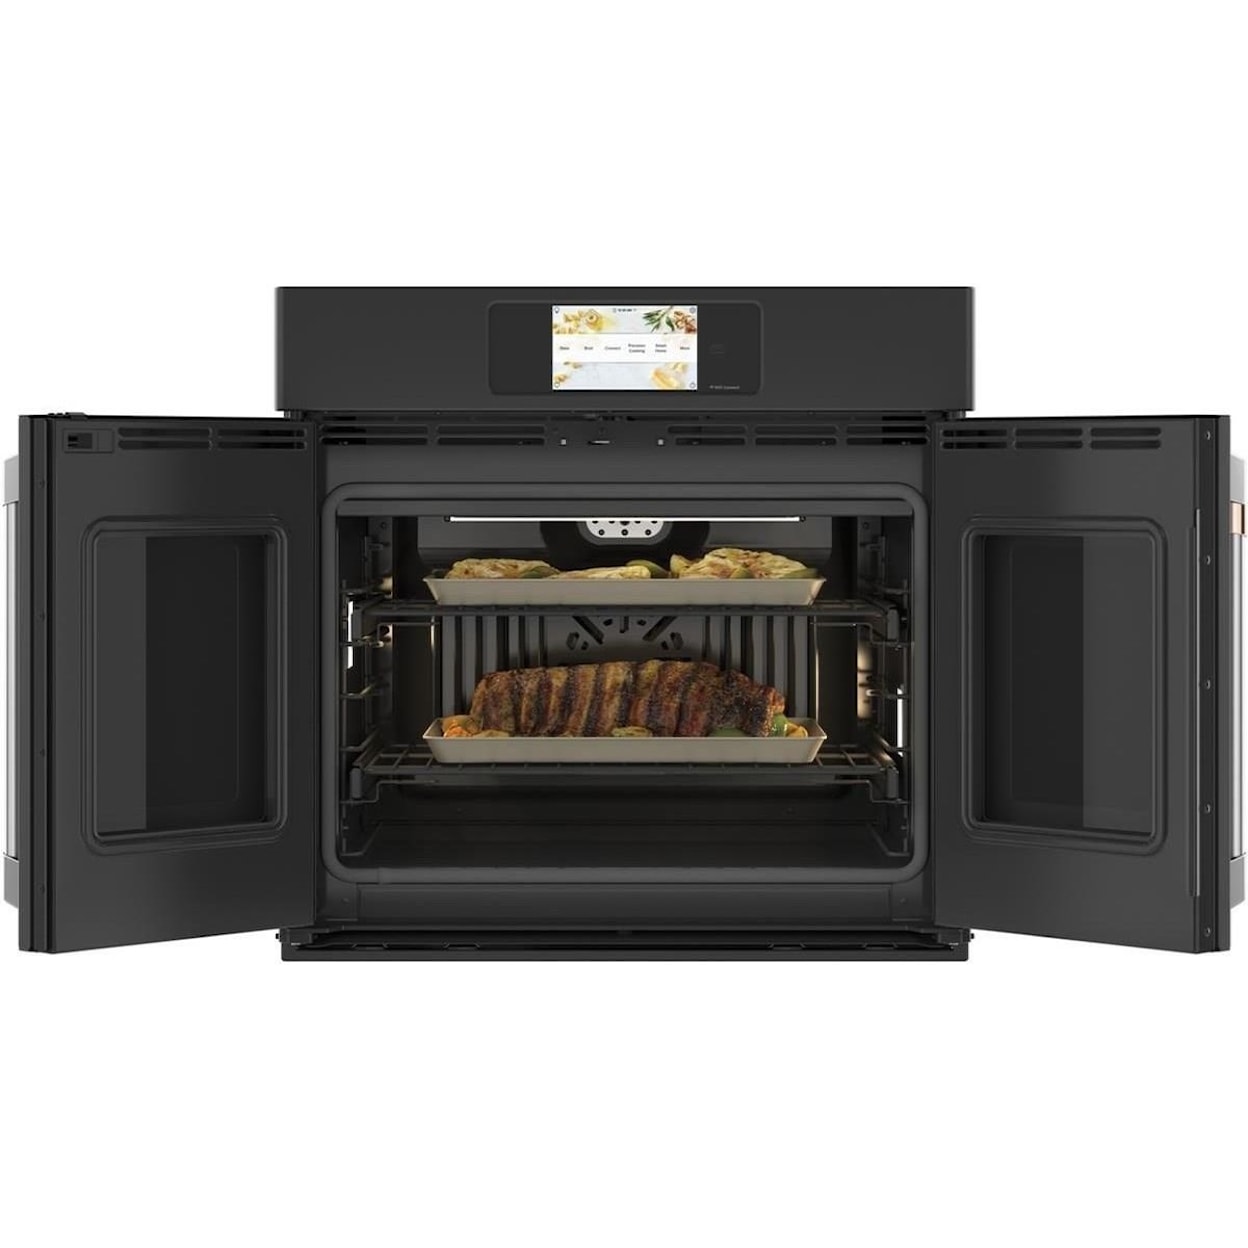 GE Appliances Ge Cafe Electric Wall Ovens Cafe´™ Professional Series 30" Built-In Oven